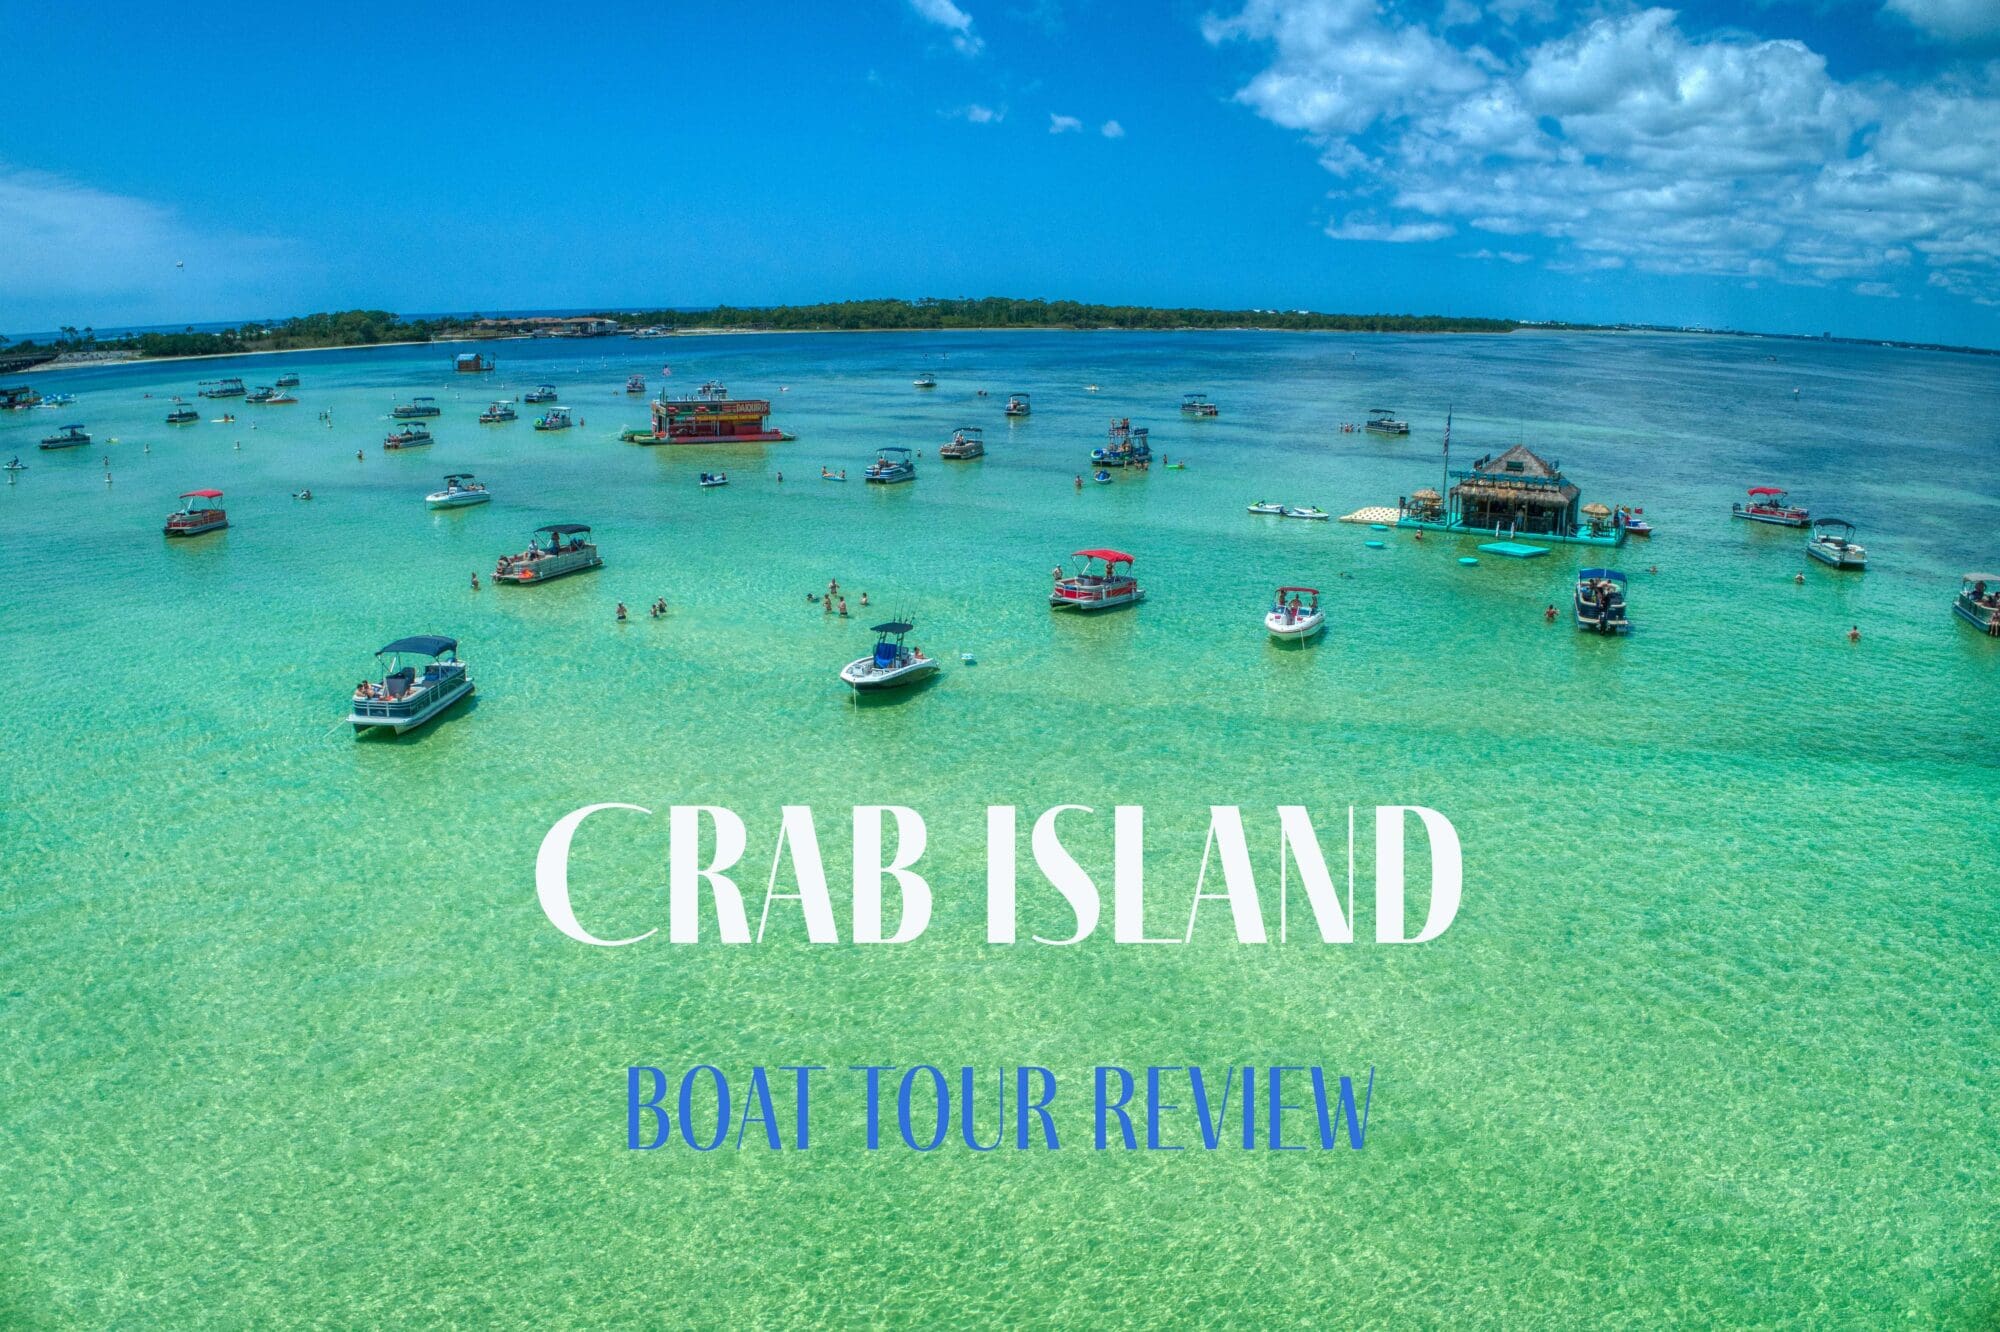 Crab Island boat tour review.